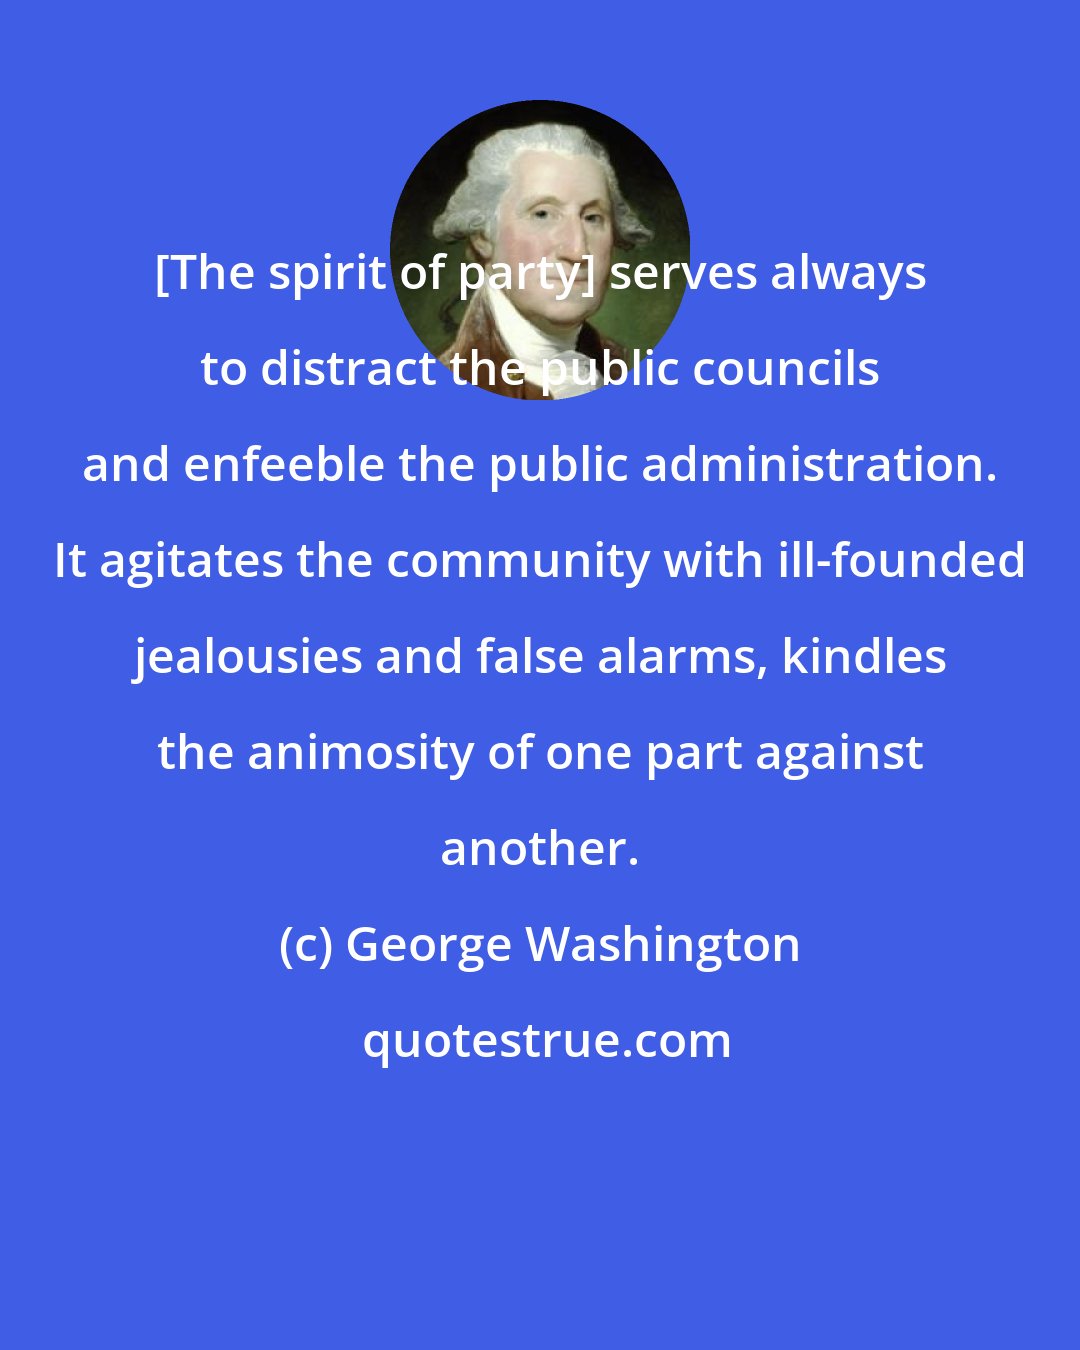 George Washington: [The spirit of party] serves always to distract the public councils and enfeeble the public administration. It agitates the community with ill-founded jealousies and false alarms, kindles the animosity of one part against another.